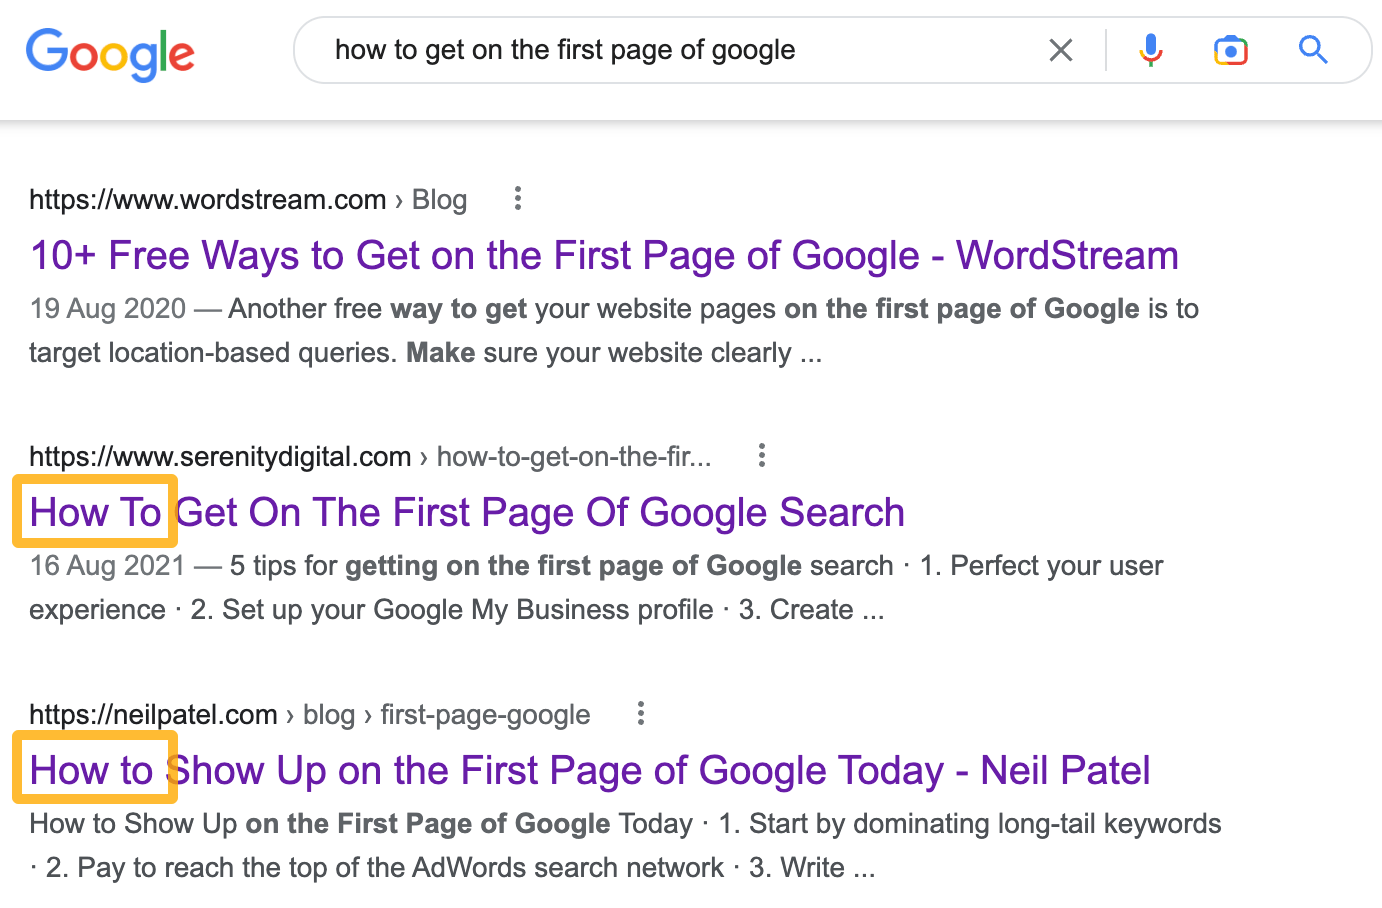 Examples of "how to" guides ranking on the first page for "how to get on the first page of google"
